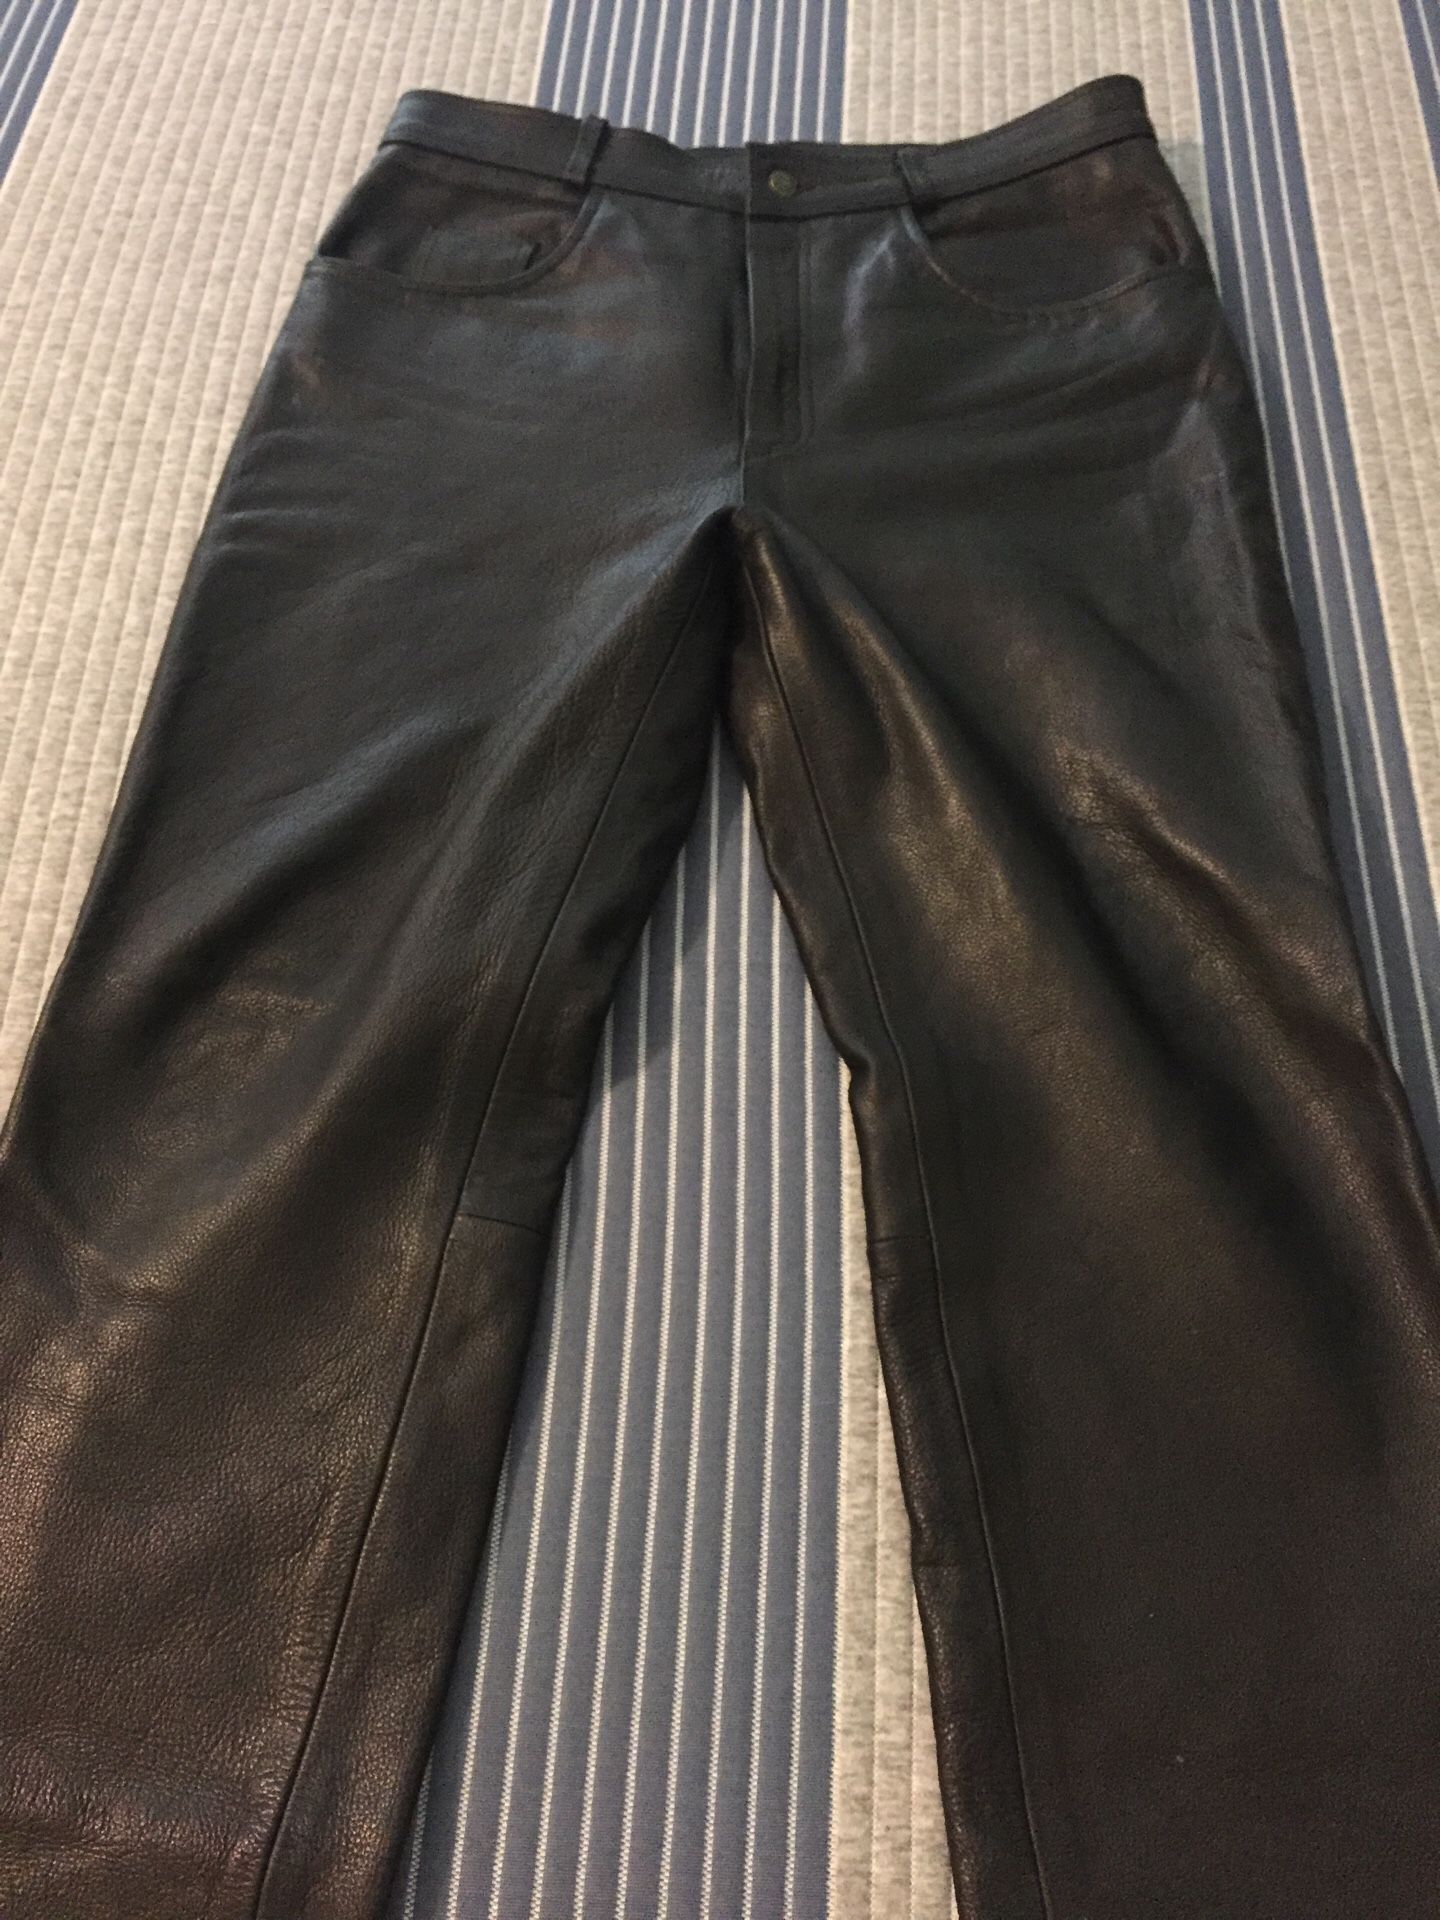 X Element motorcycle gear leather pants